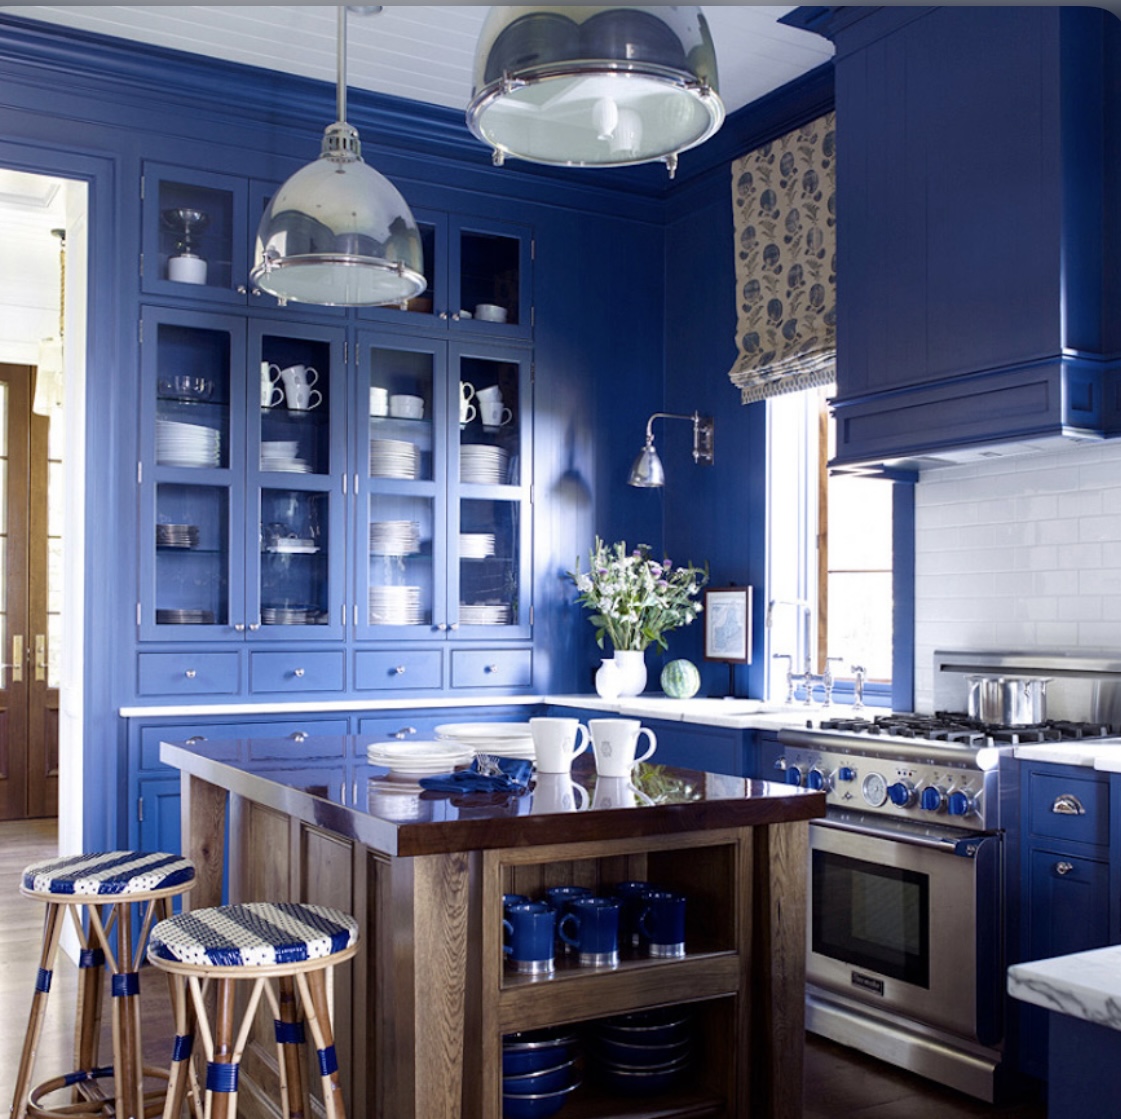 7 Ways to Update Your Kitchen on a Budget